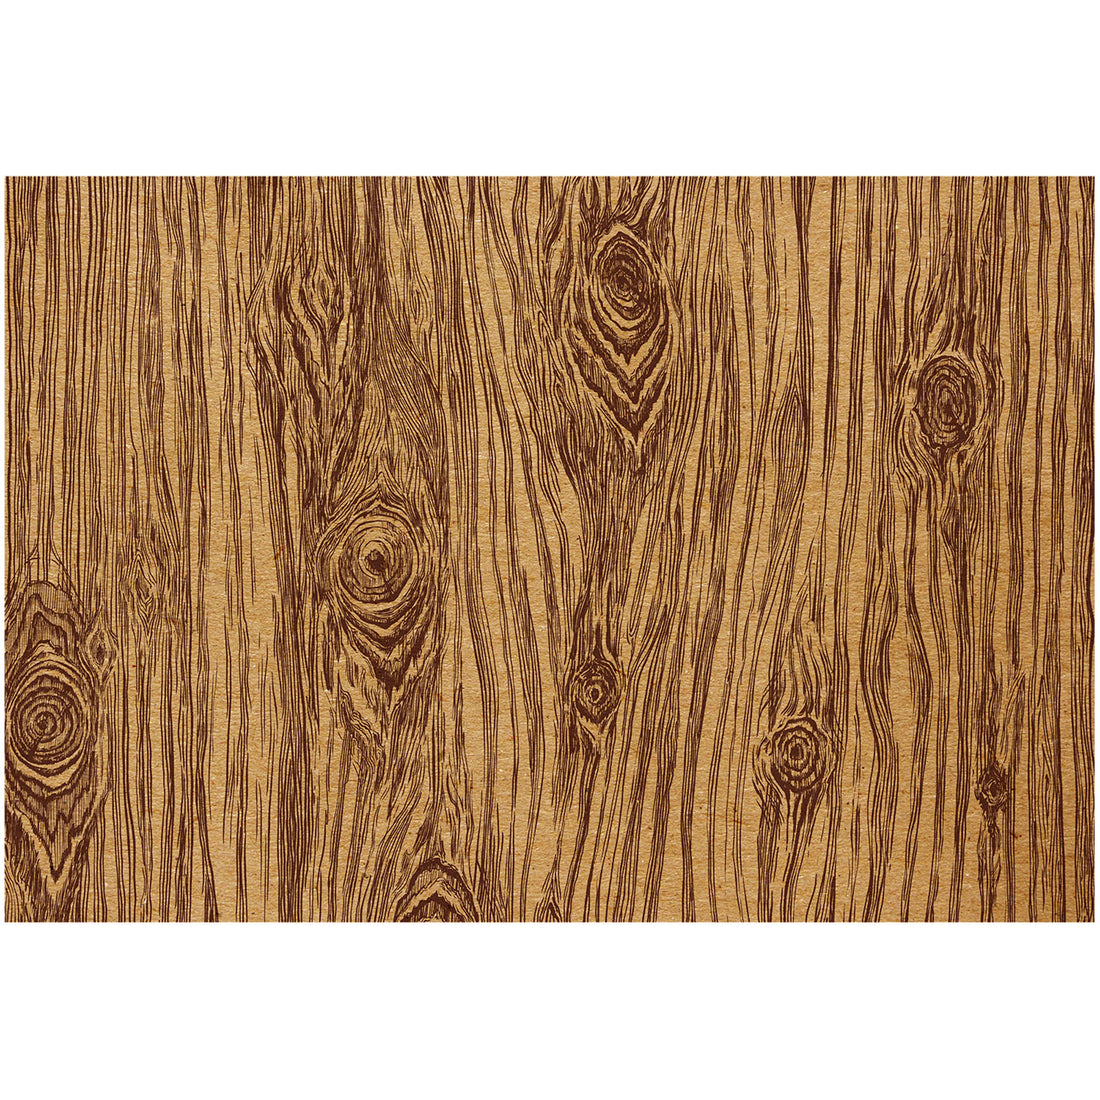 An illustrated, vertical wood grain pattern featuring natural lines and knots, in deep brown over medium tan.